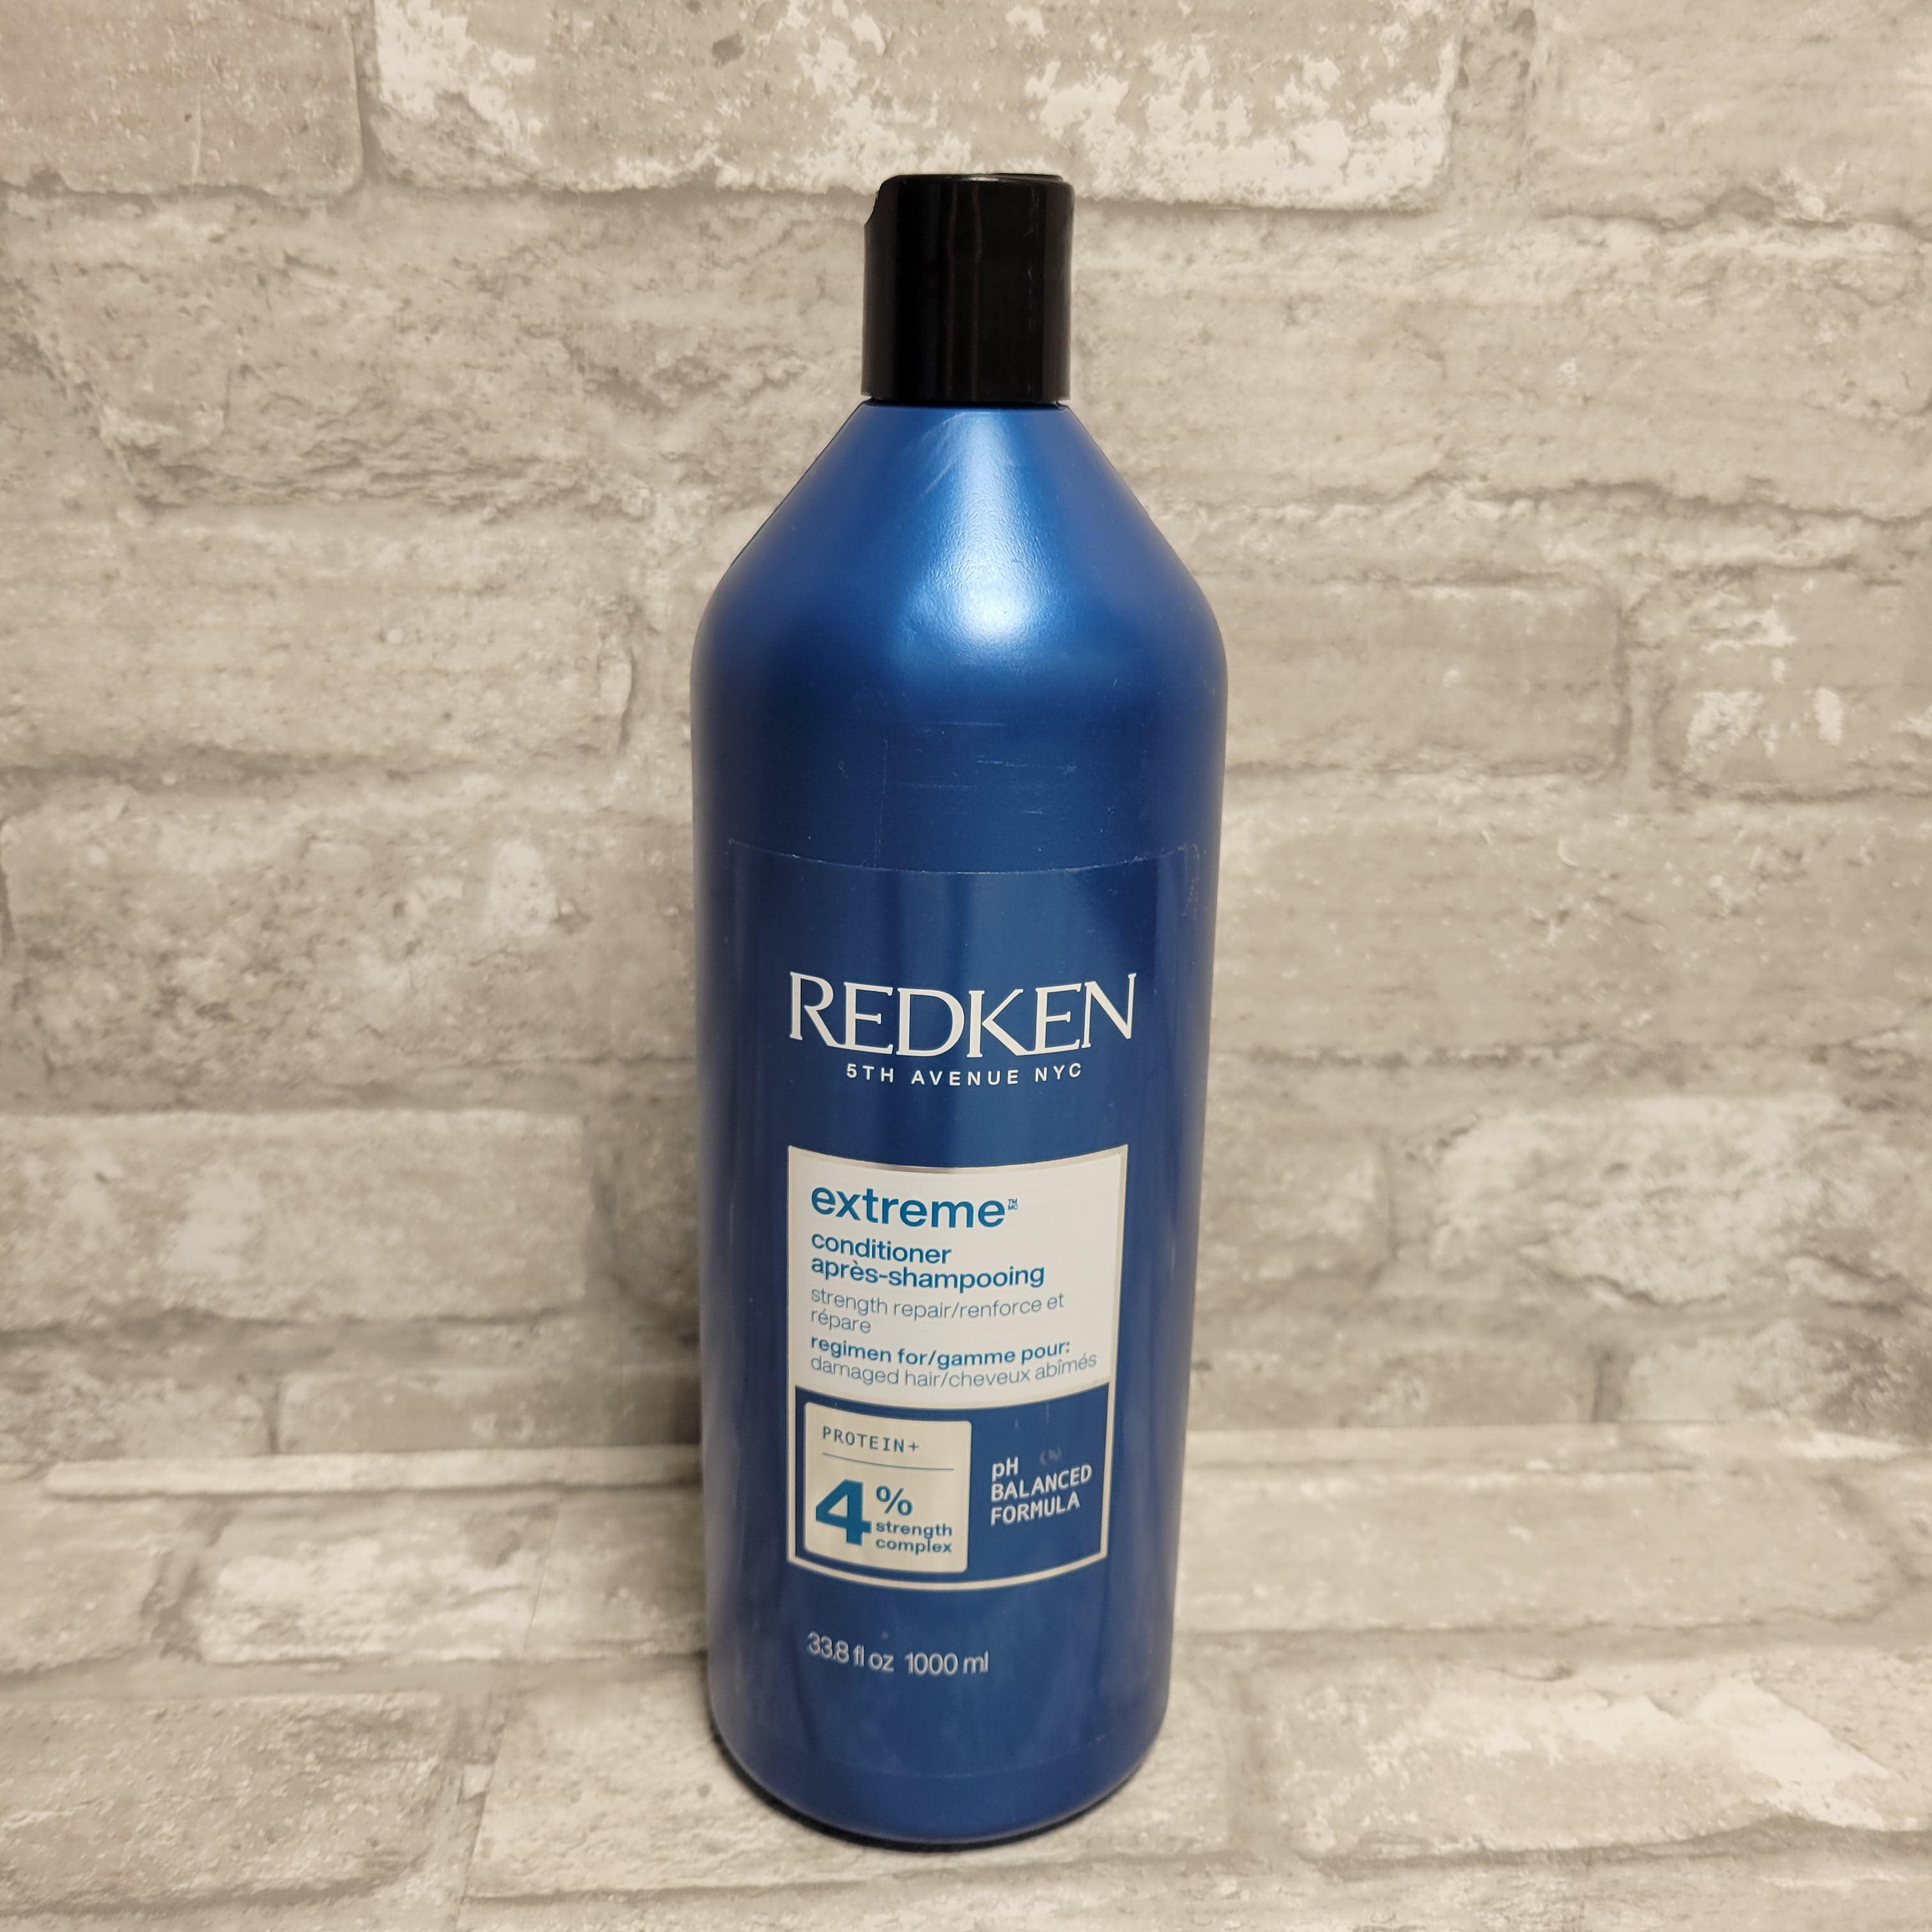 Redken Extreme Conditioner Strength & Repair for Damaged Hair (33.8 fl oz) (8042255024366)